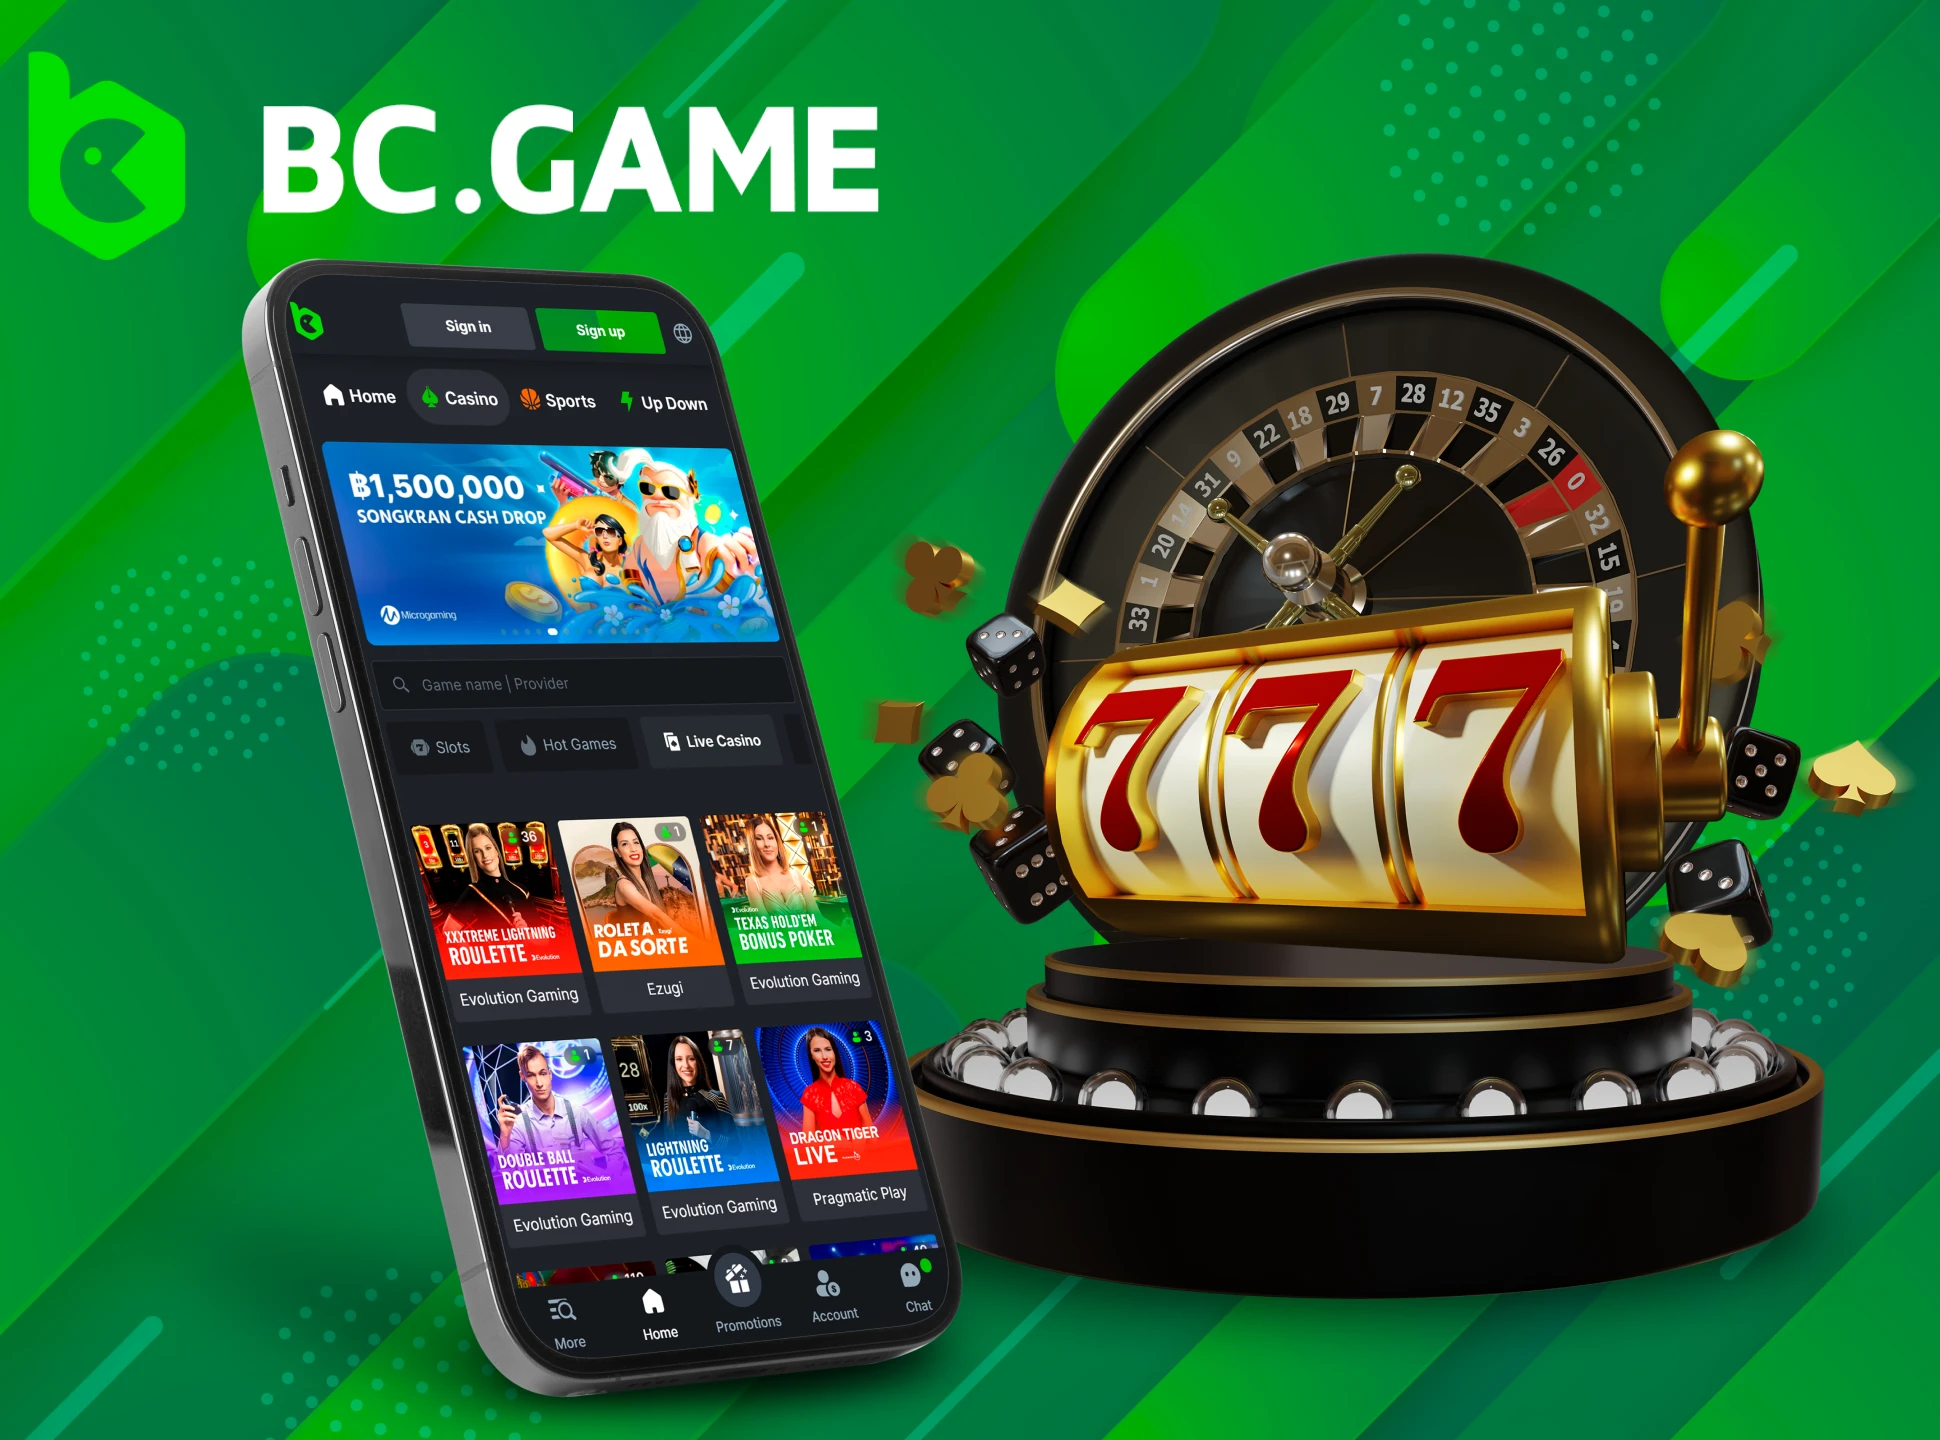 The BC Game app has a large live casino section.